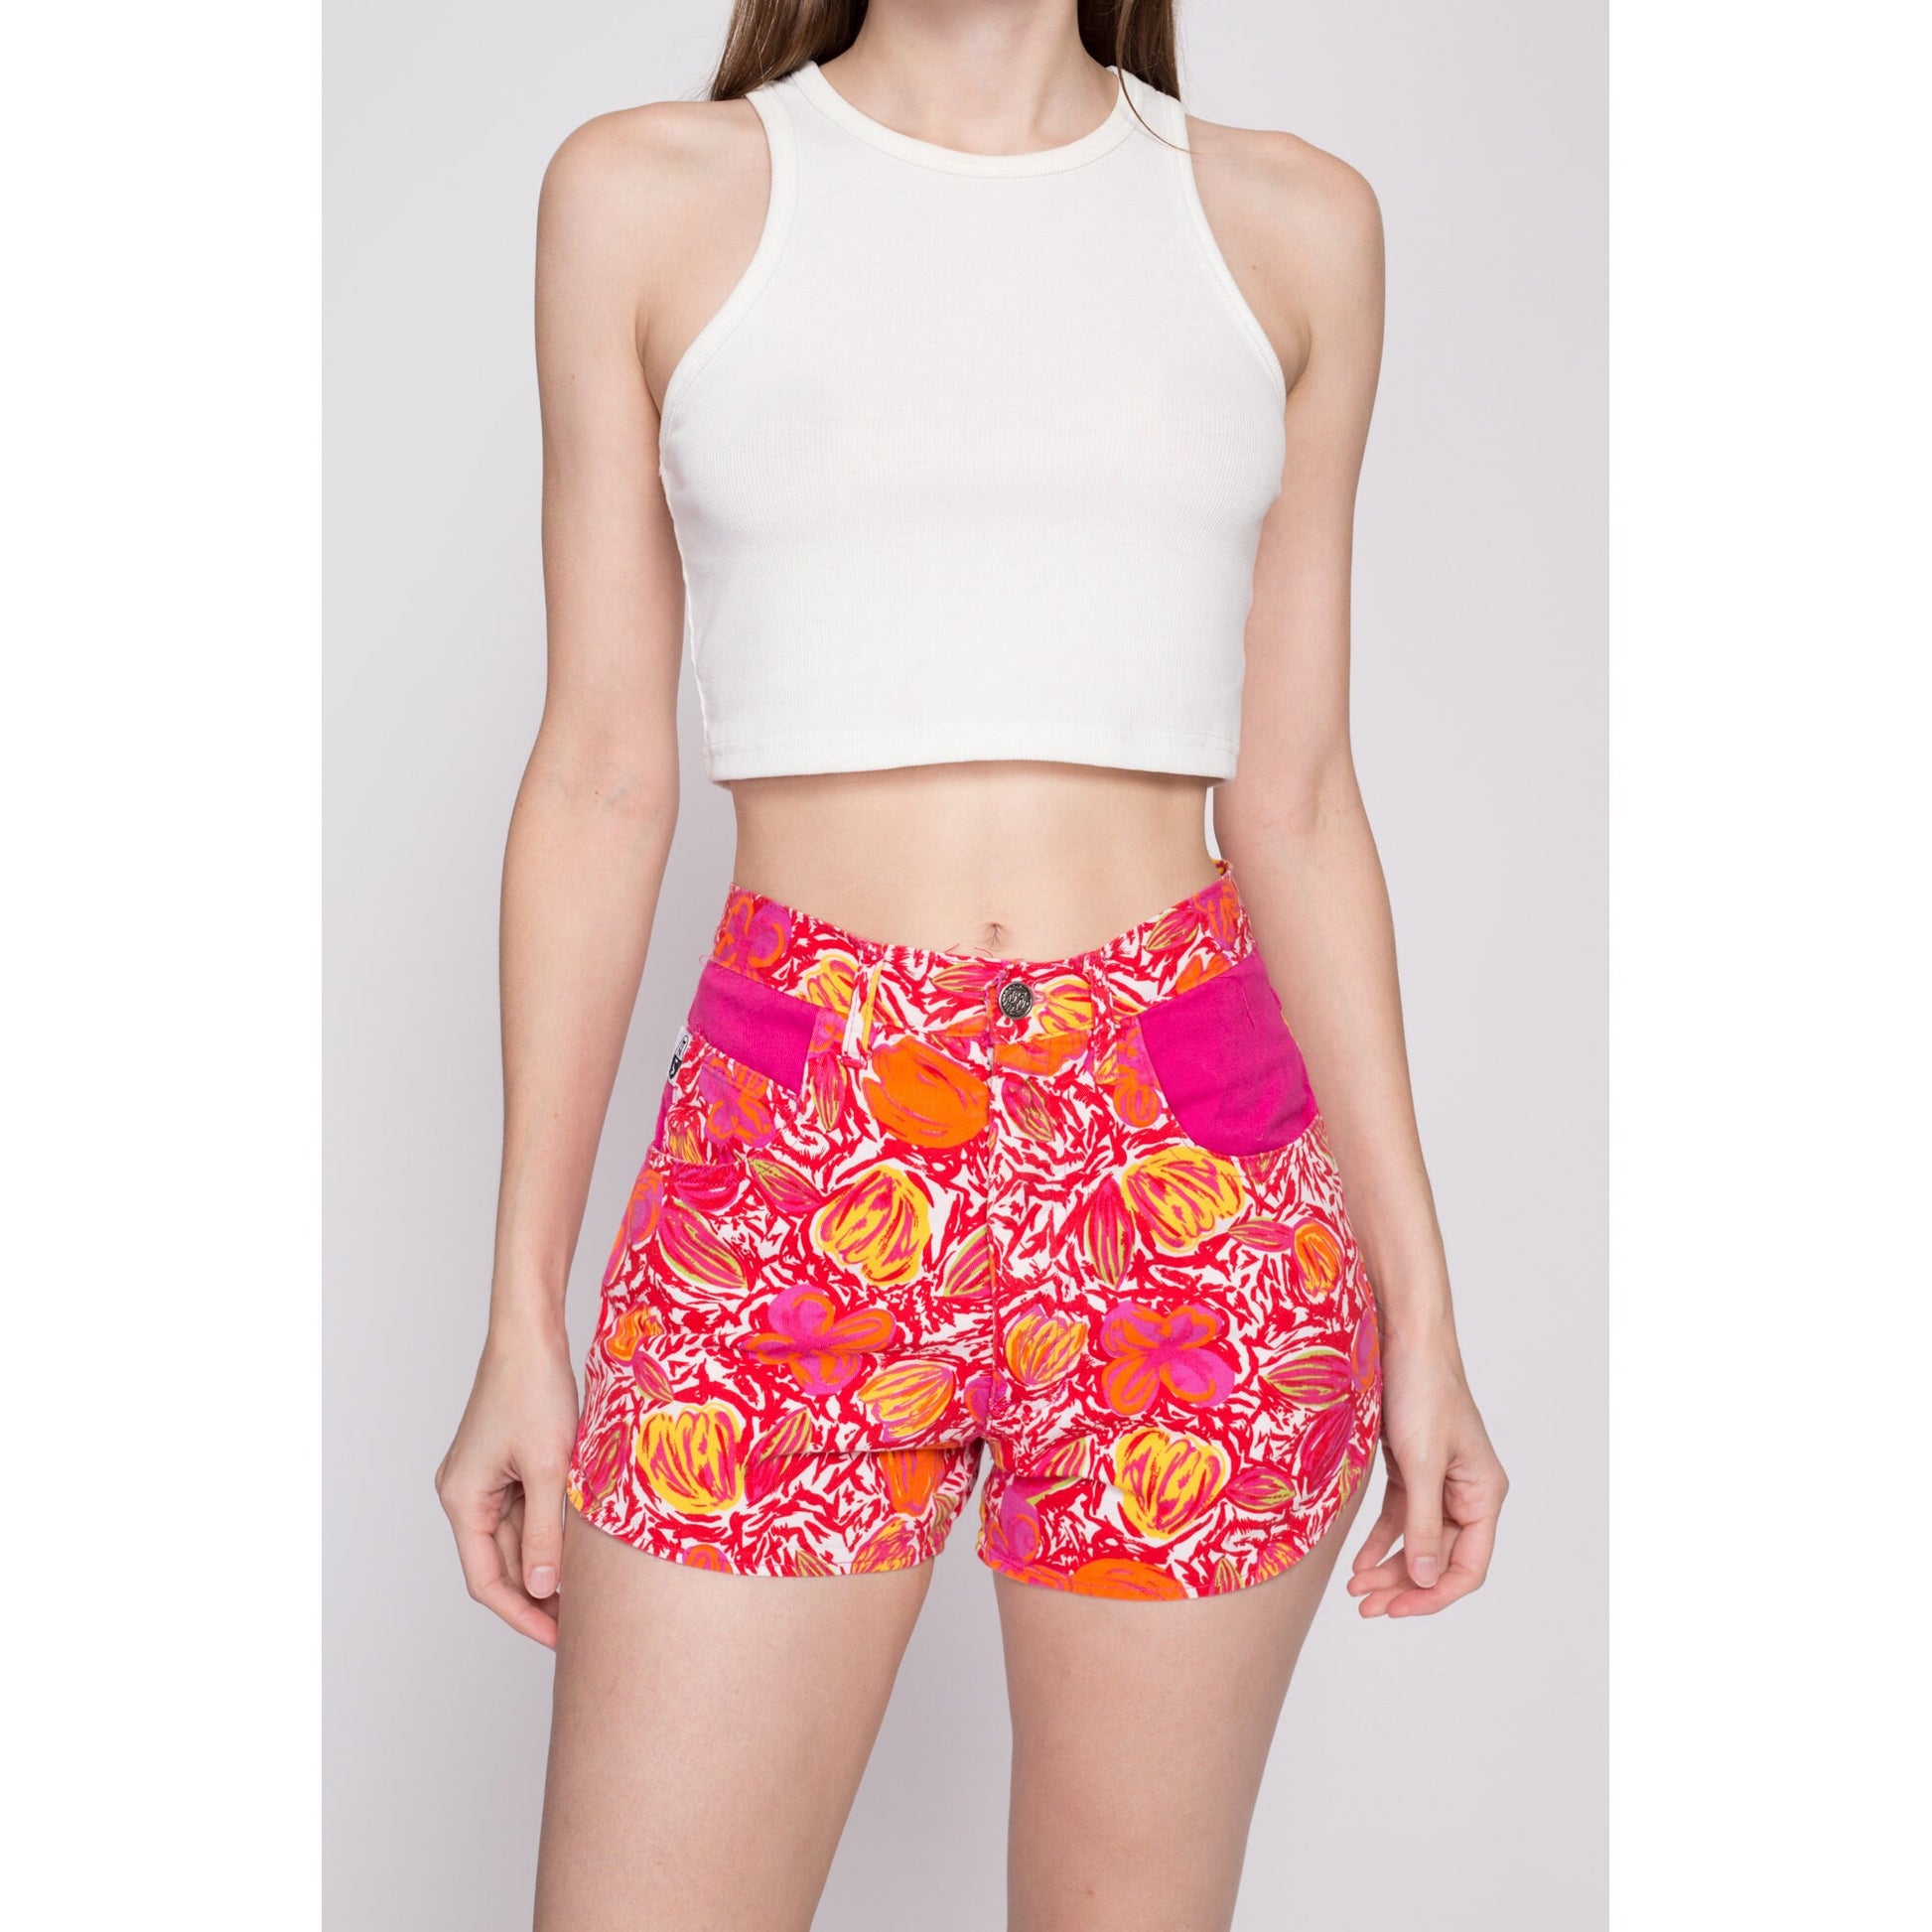 90s Hot Pink Floral Shorts - XS to Small | Vintage High Waisted Cotton Denim Retro Mini Cheeky Shorts